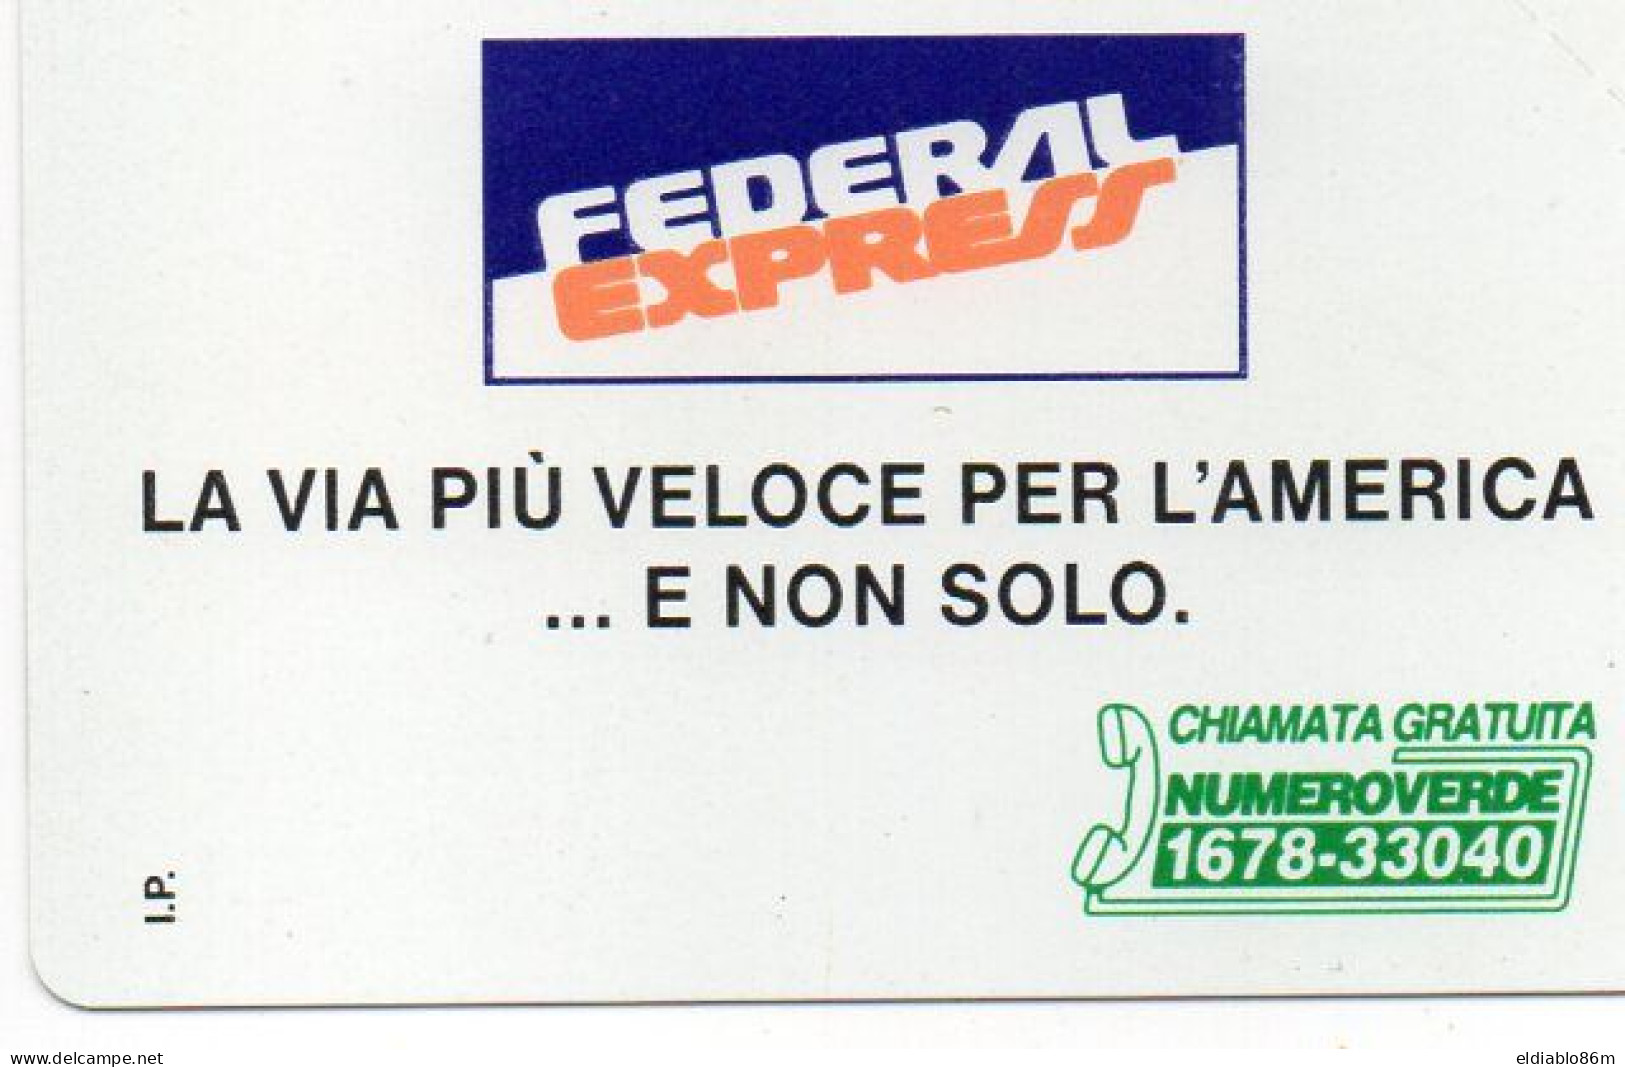 ITALY - MAGNETIC CARD - SIP - PRIVATE RESE PUBBLICHE - 190 - FEDERAL EXPRESS - MINT - Private New Editions